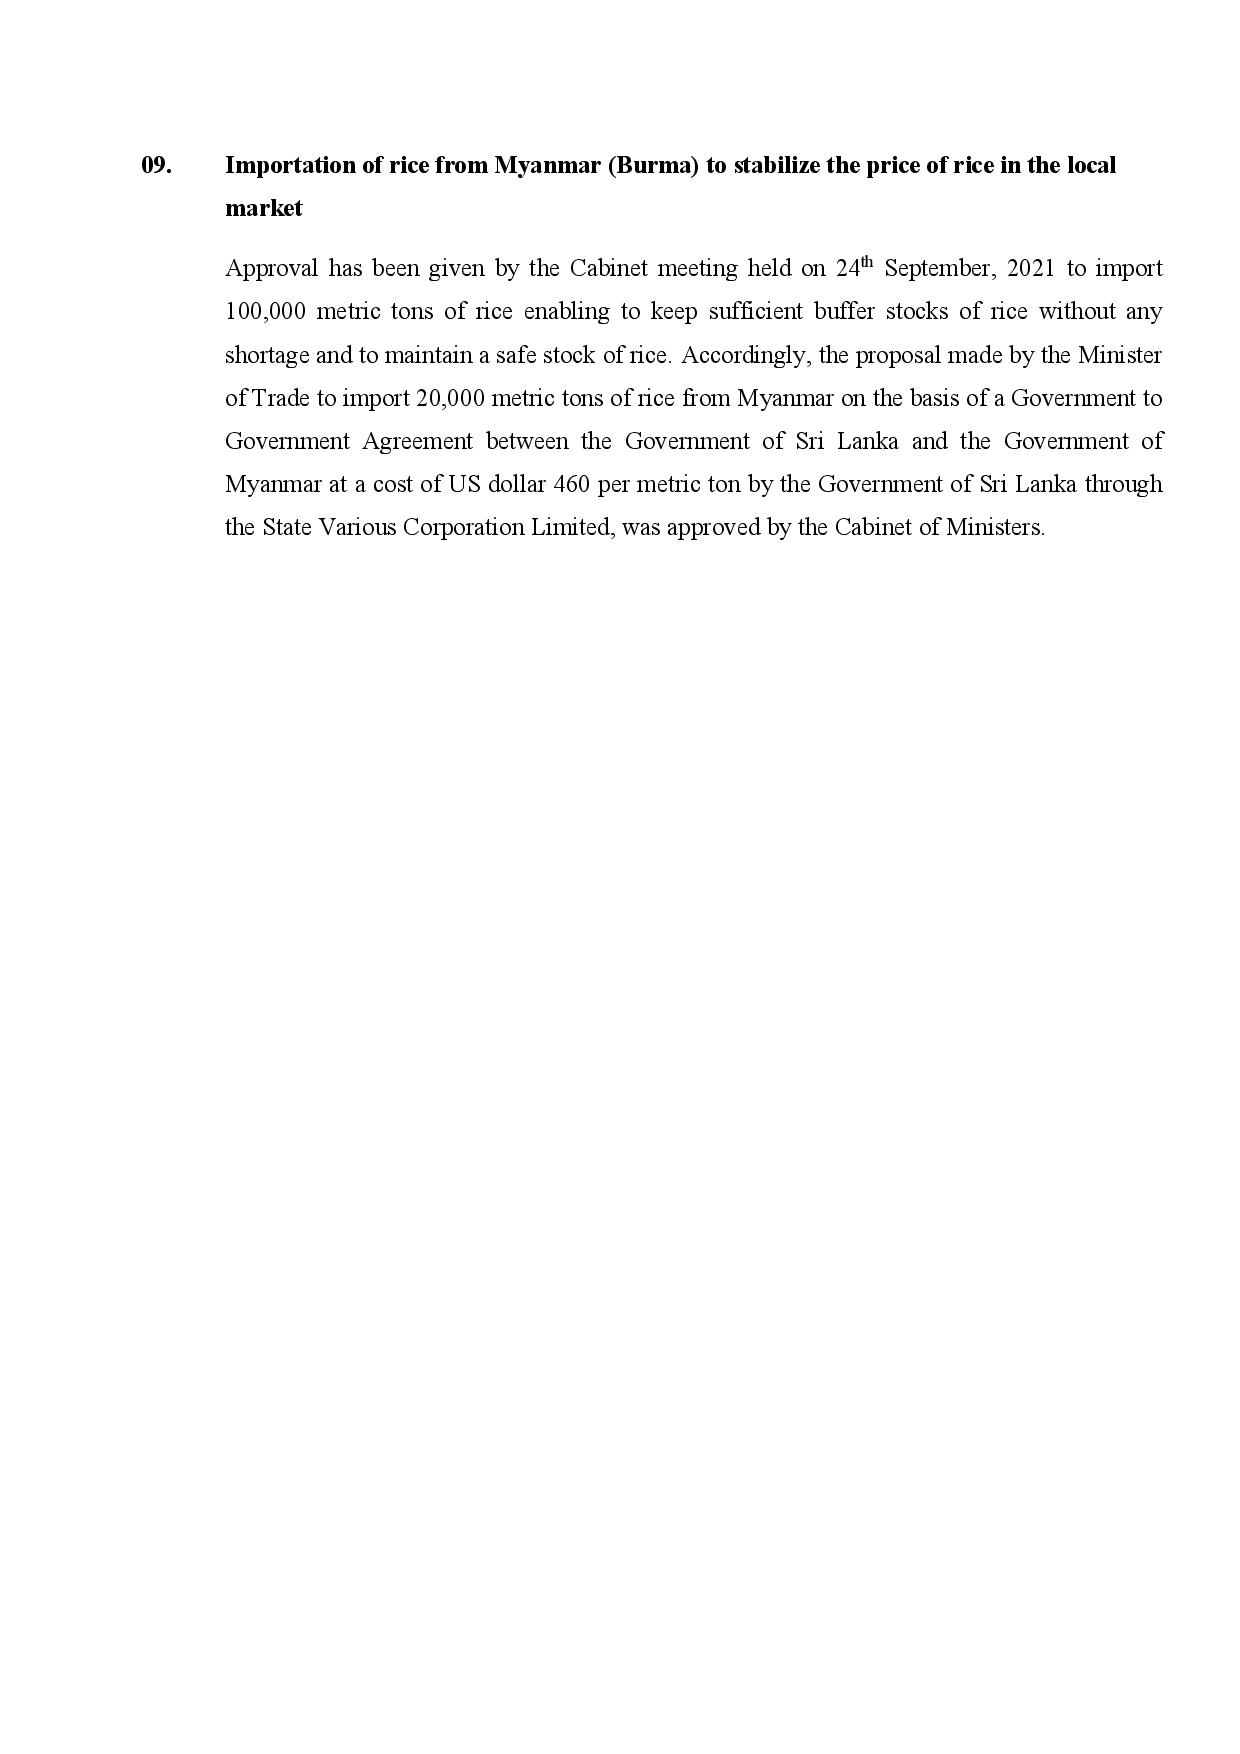 Cabinet Decision on 29.11.2021 English page 004